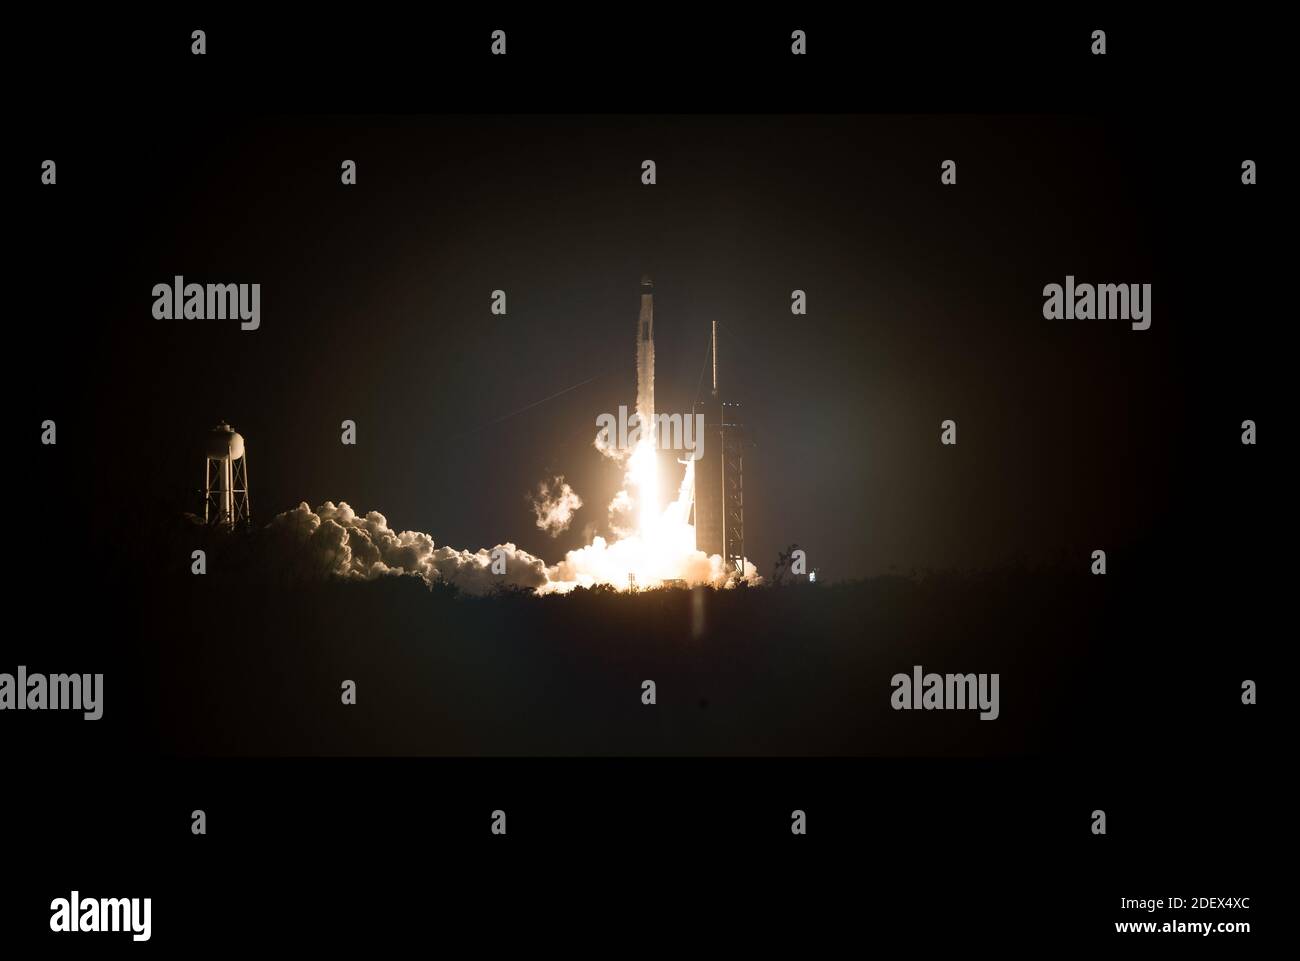 KENNEDY SPACE CENTER, FL, USA - 15 November 2020 - A SpaceX Falcon 9 rocket carrying the company's Crew Dragon spacecraft is launched on NASA’s SpaceX Stock Photo